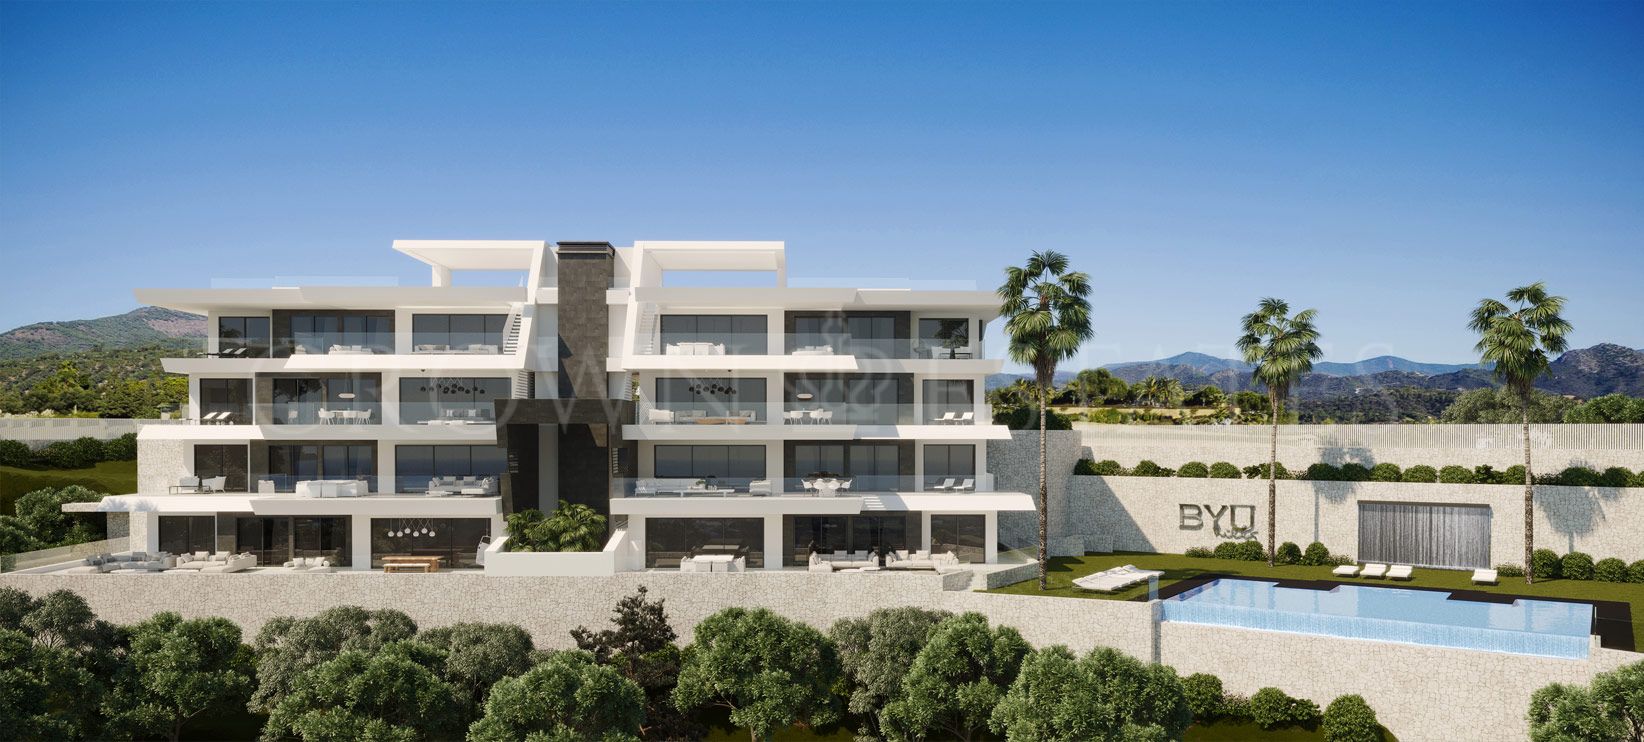 BYU HILLS is a pearl at the Costa del Sol, consisting of 24 apartments spread over three buildings.